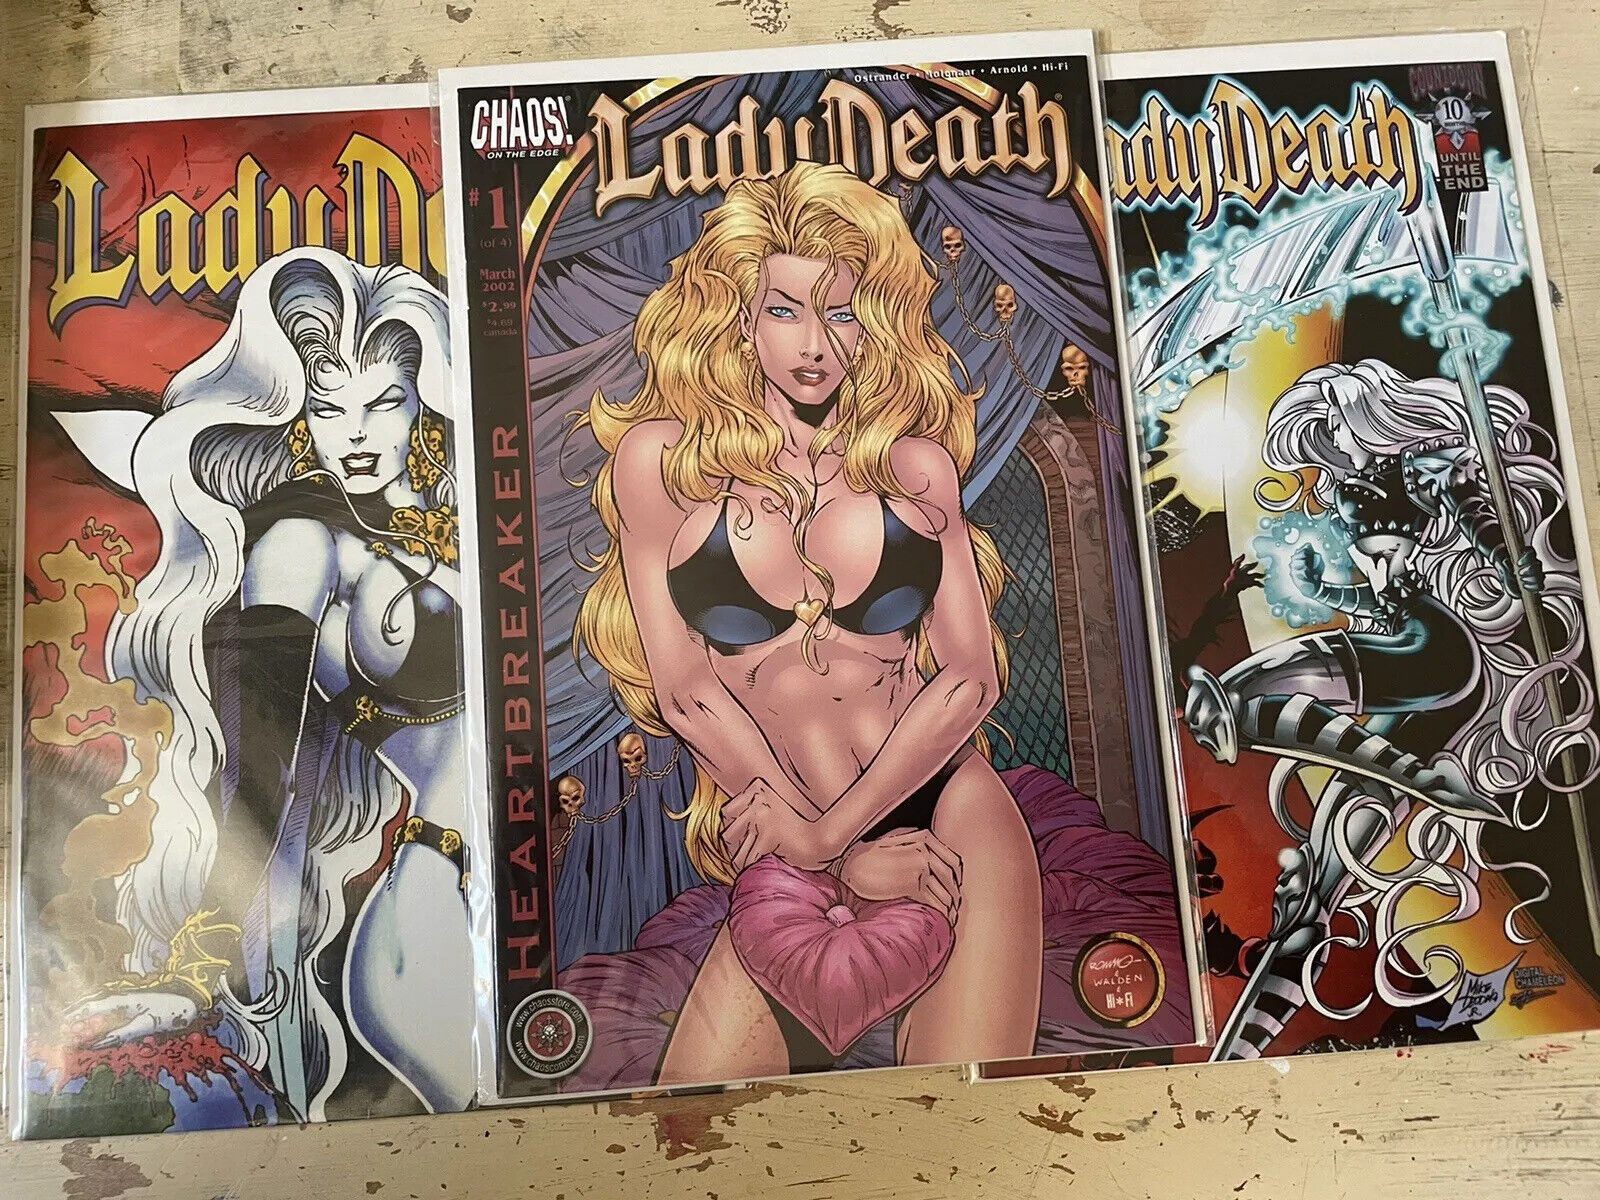 CHAOS! COMICS LADY DEATH HEARTBREAKER #1  MARCH 2002 Also 2 Other Books